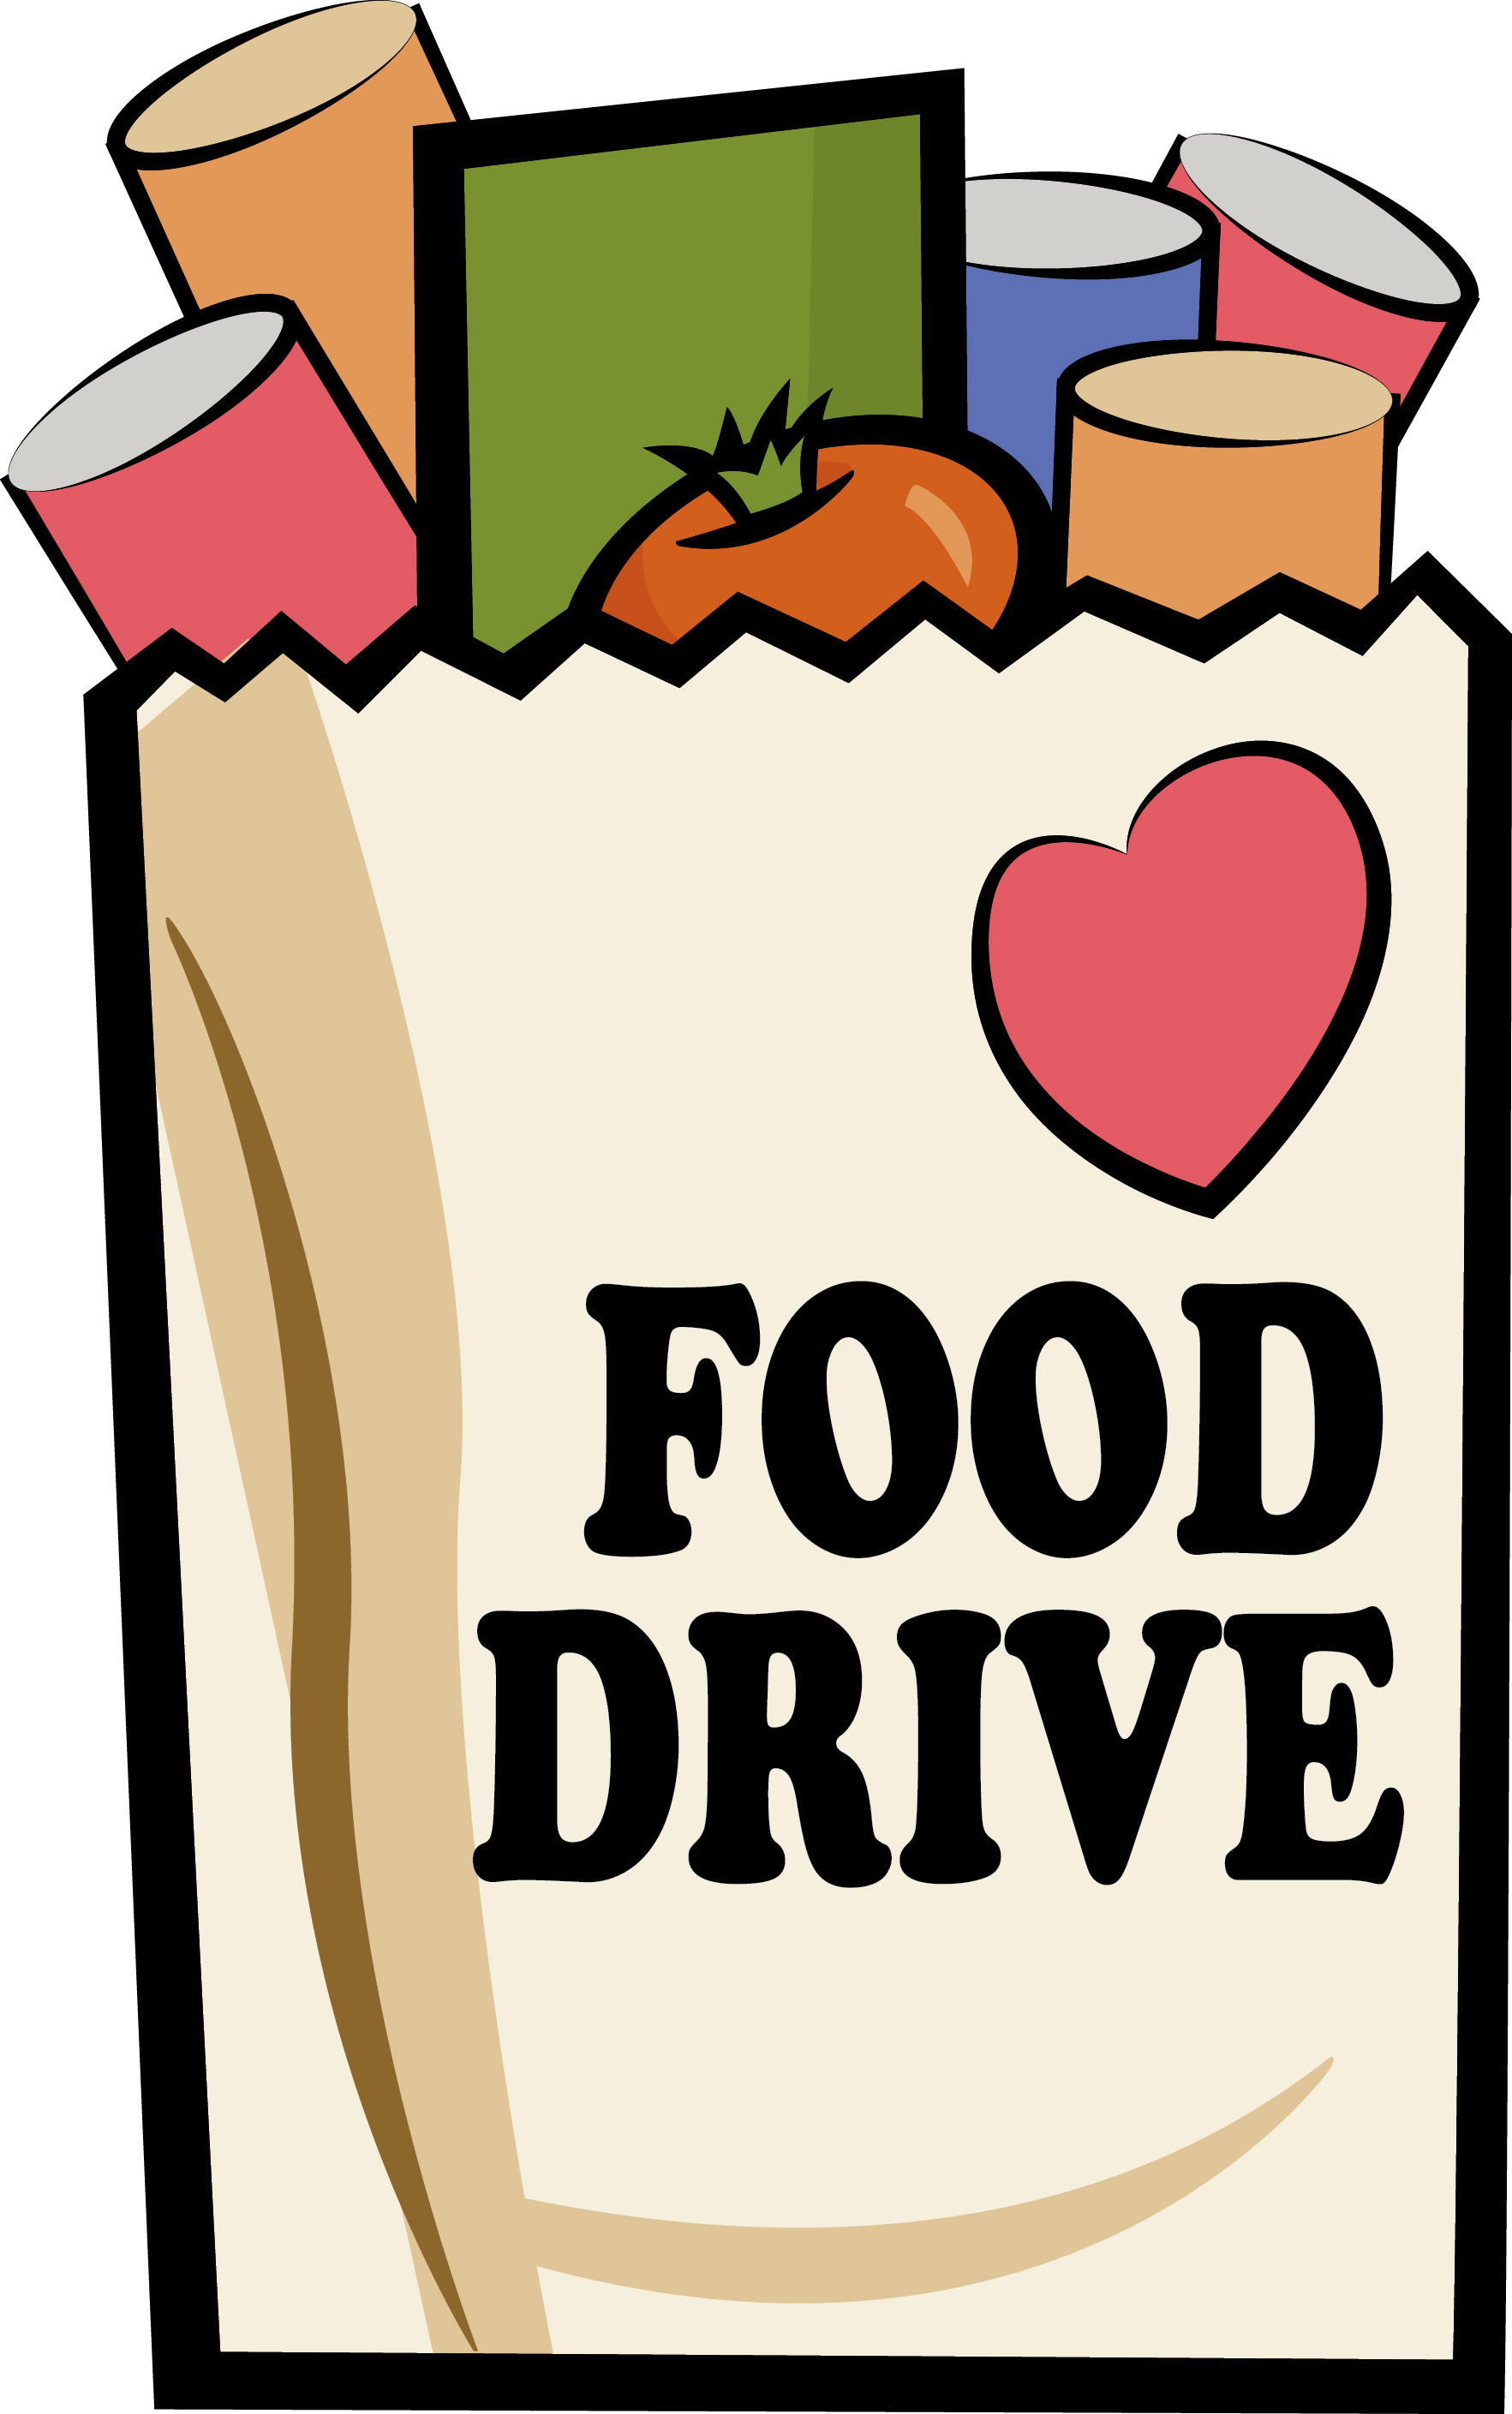 free clipart food drive - Google Search Intended For Canned Food Drive Flyer Template